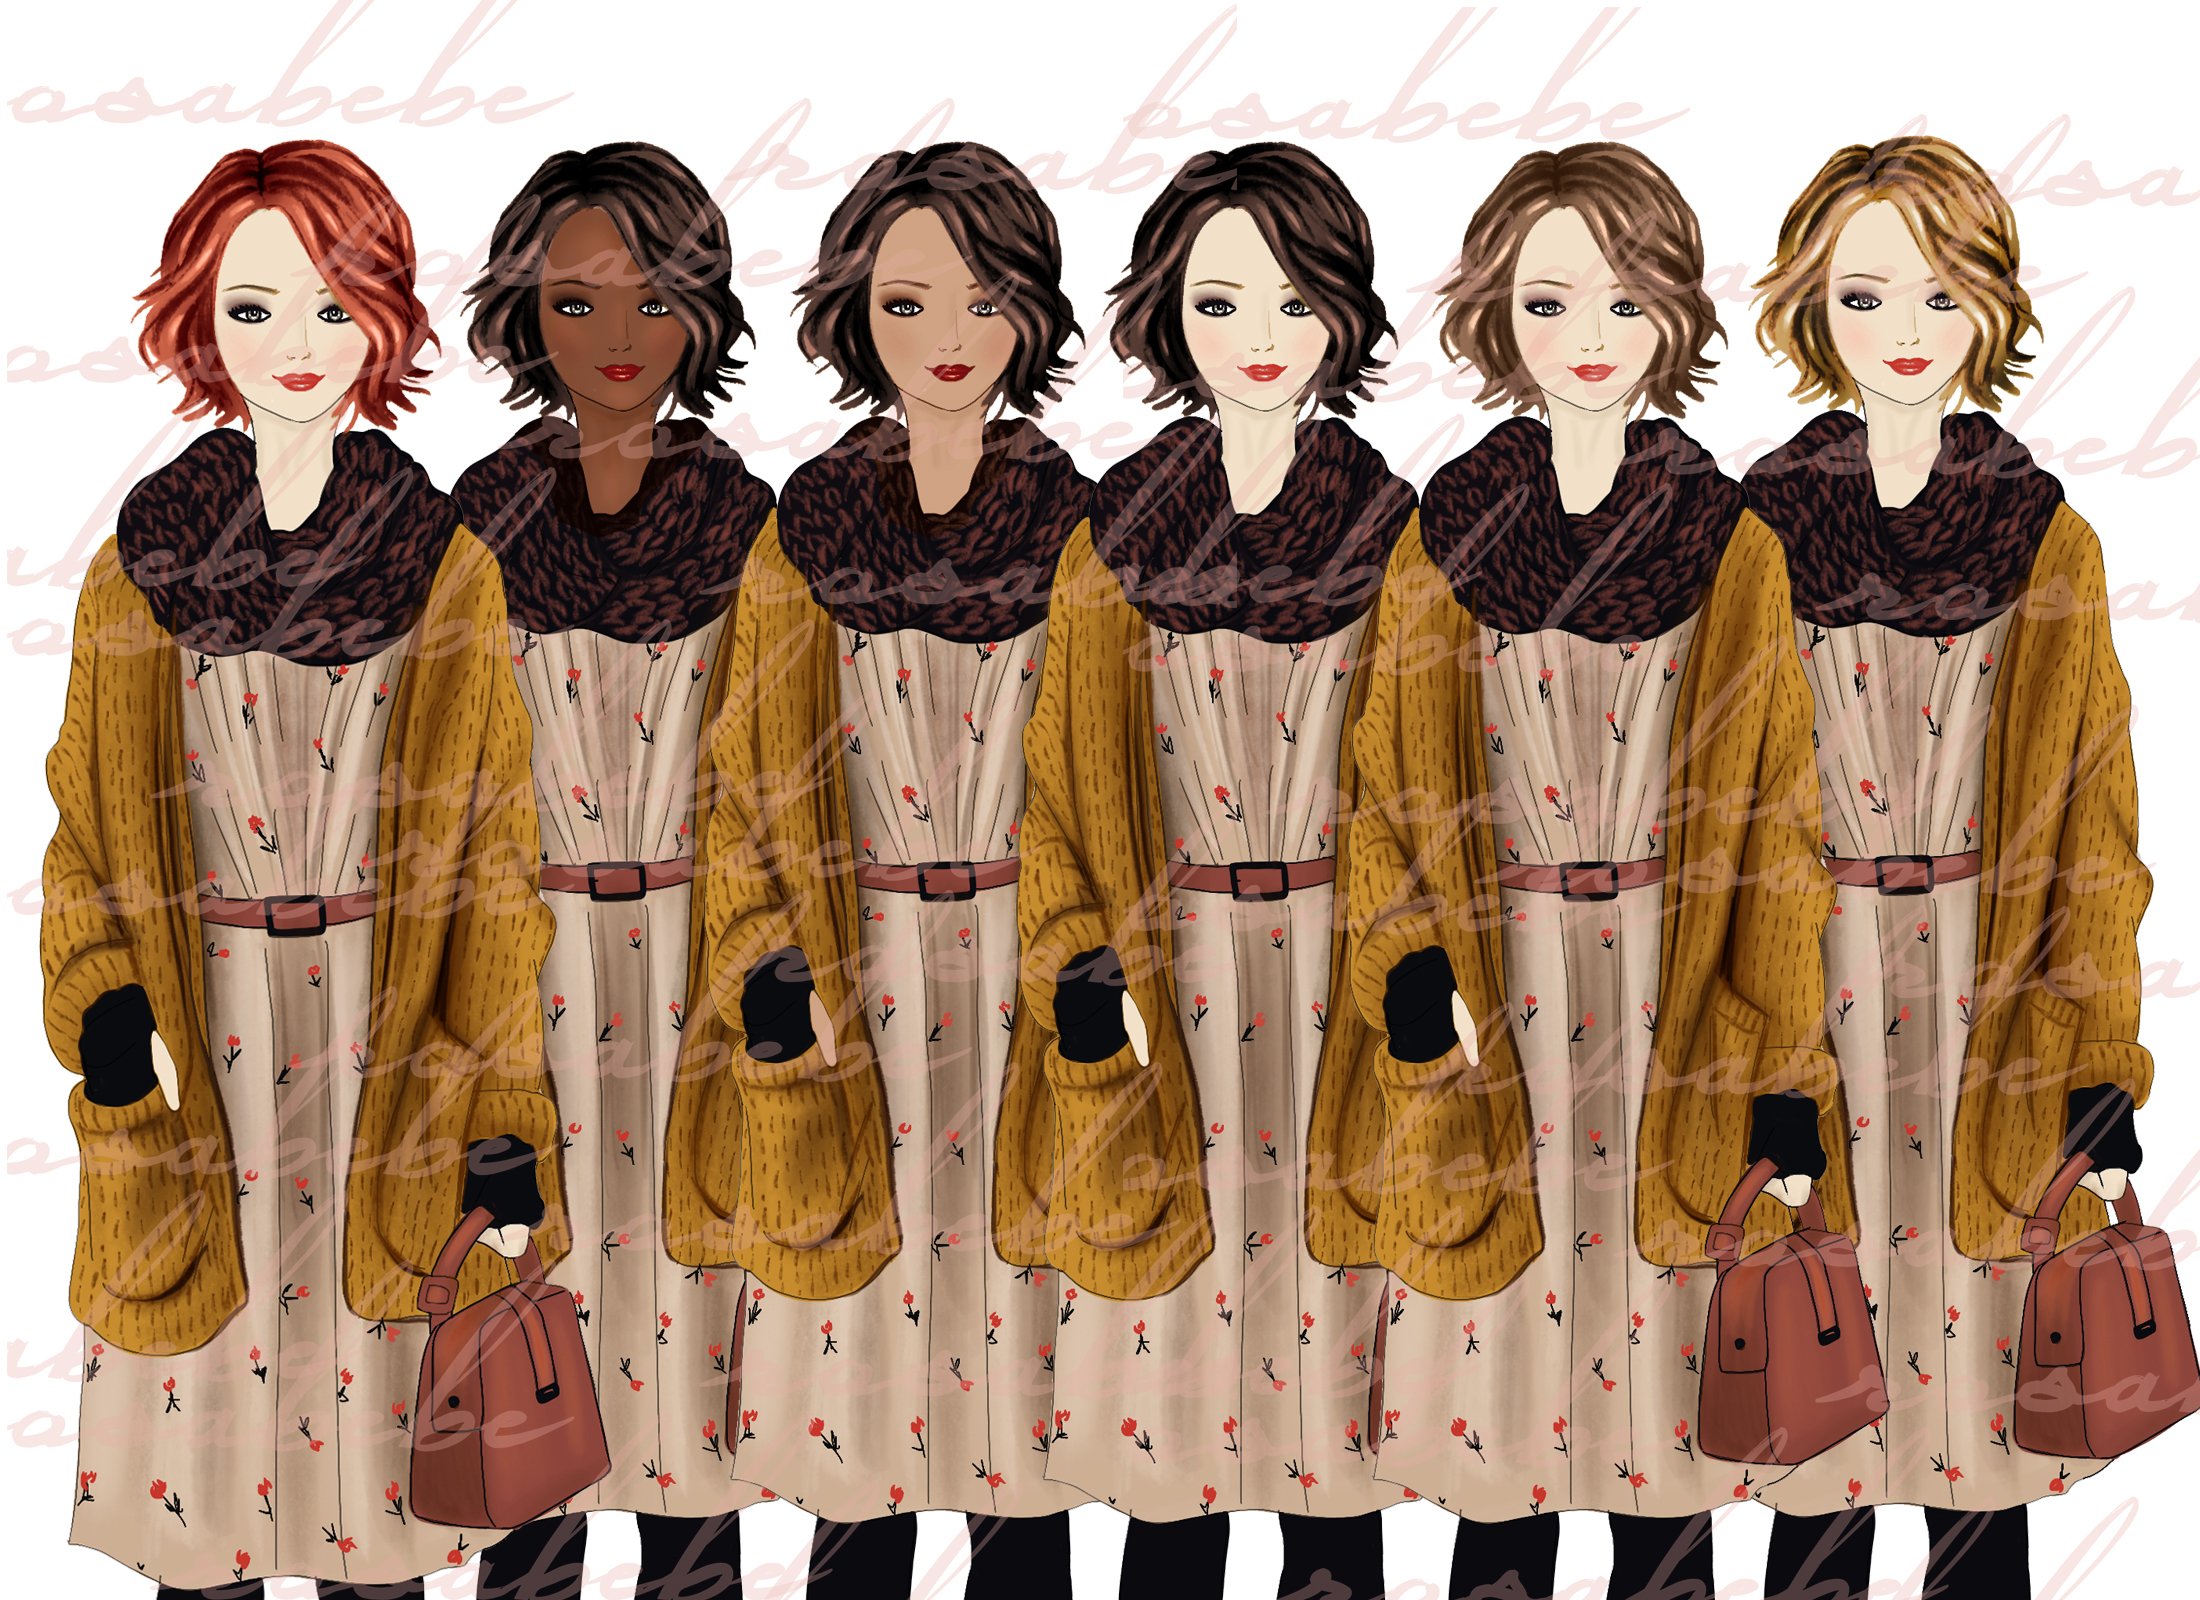 Characters of women for autumn illustration.